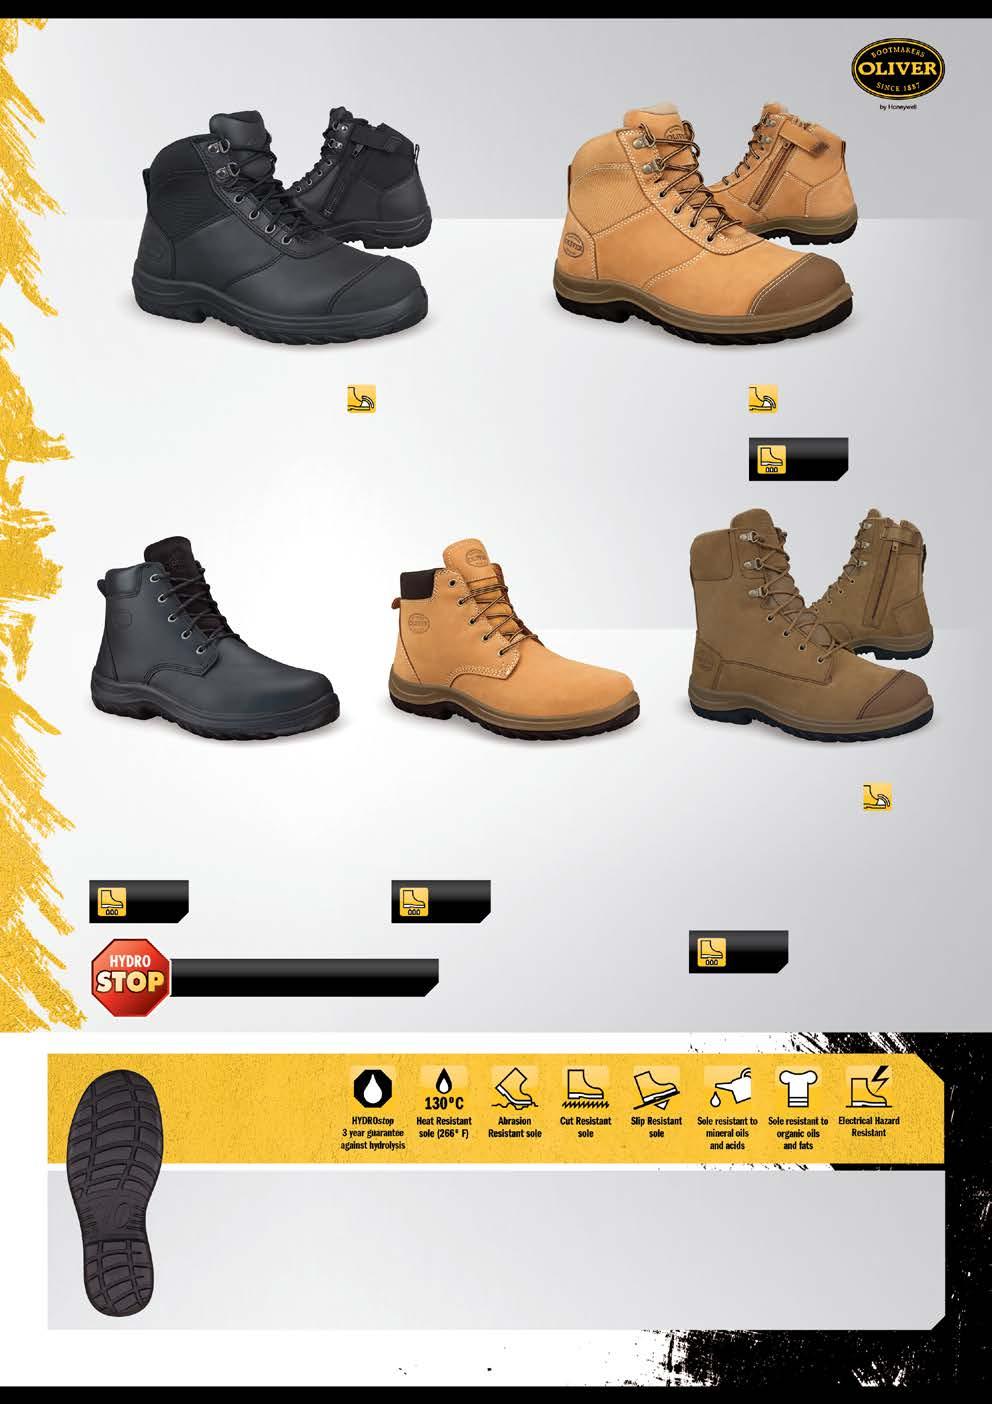 WB34 SERIES 34-660 BLACK ZIP SIDED ANKLE BOOT Full lining and comfort footbed infused with Convenient side zip Toe bumper to protect against scuffing EXTRA FEATURES: TOE BUMPER 34-662 WHEAT ZIP SIDED